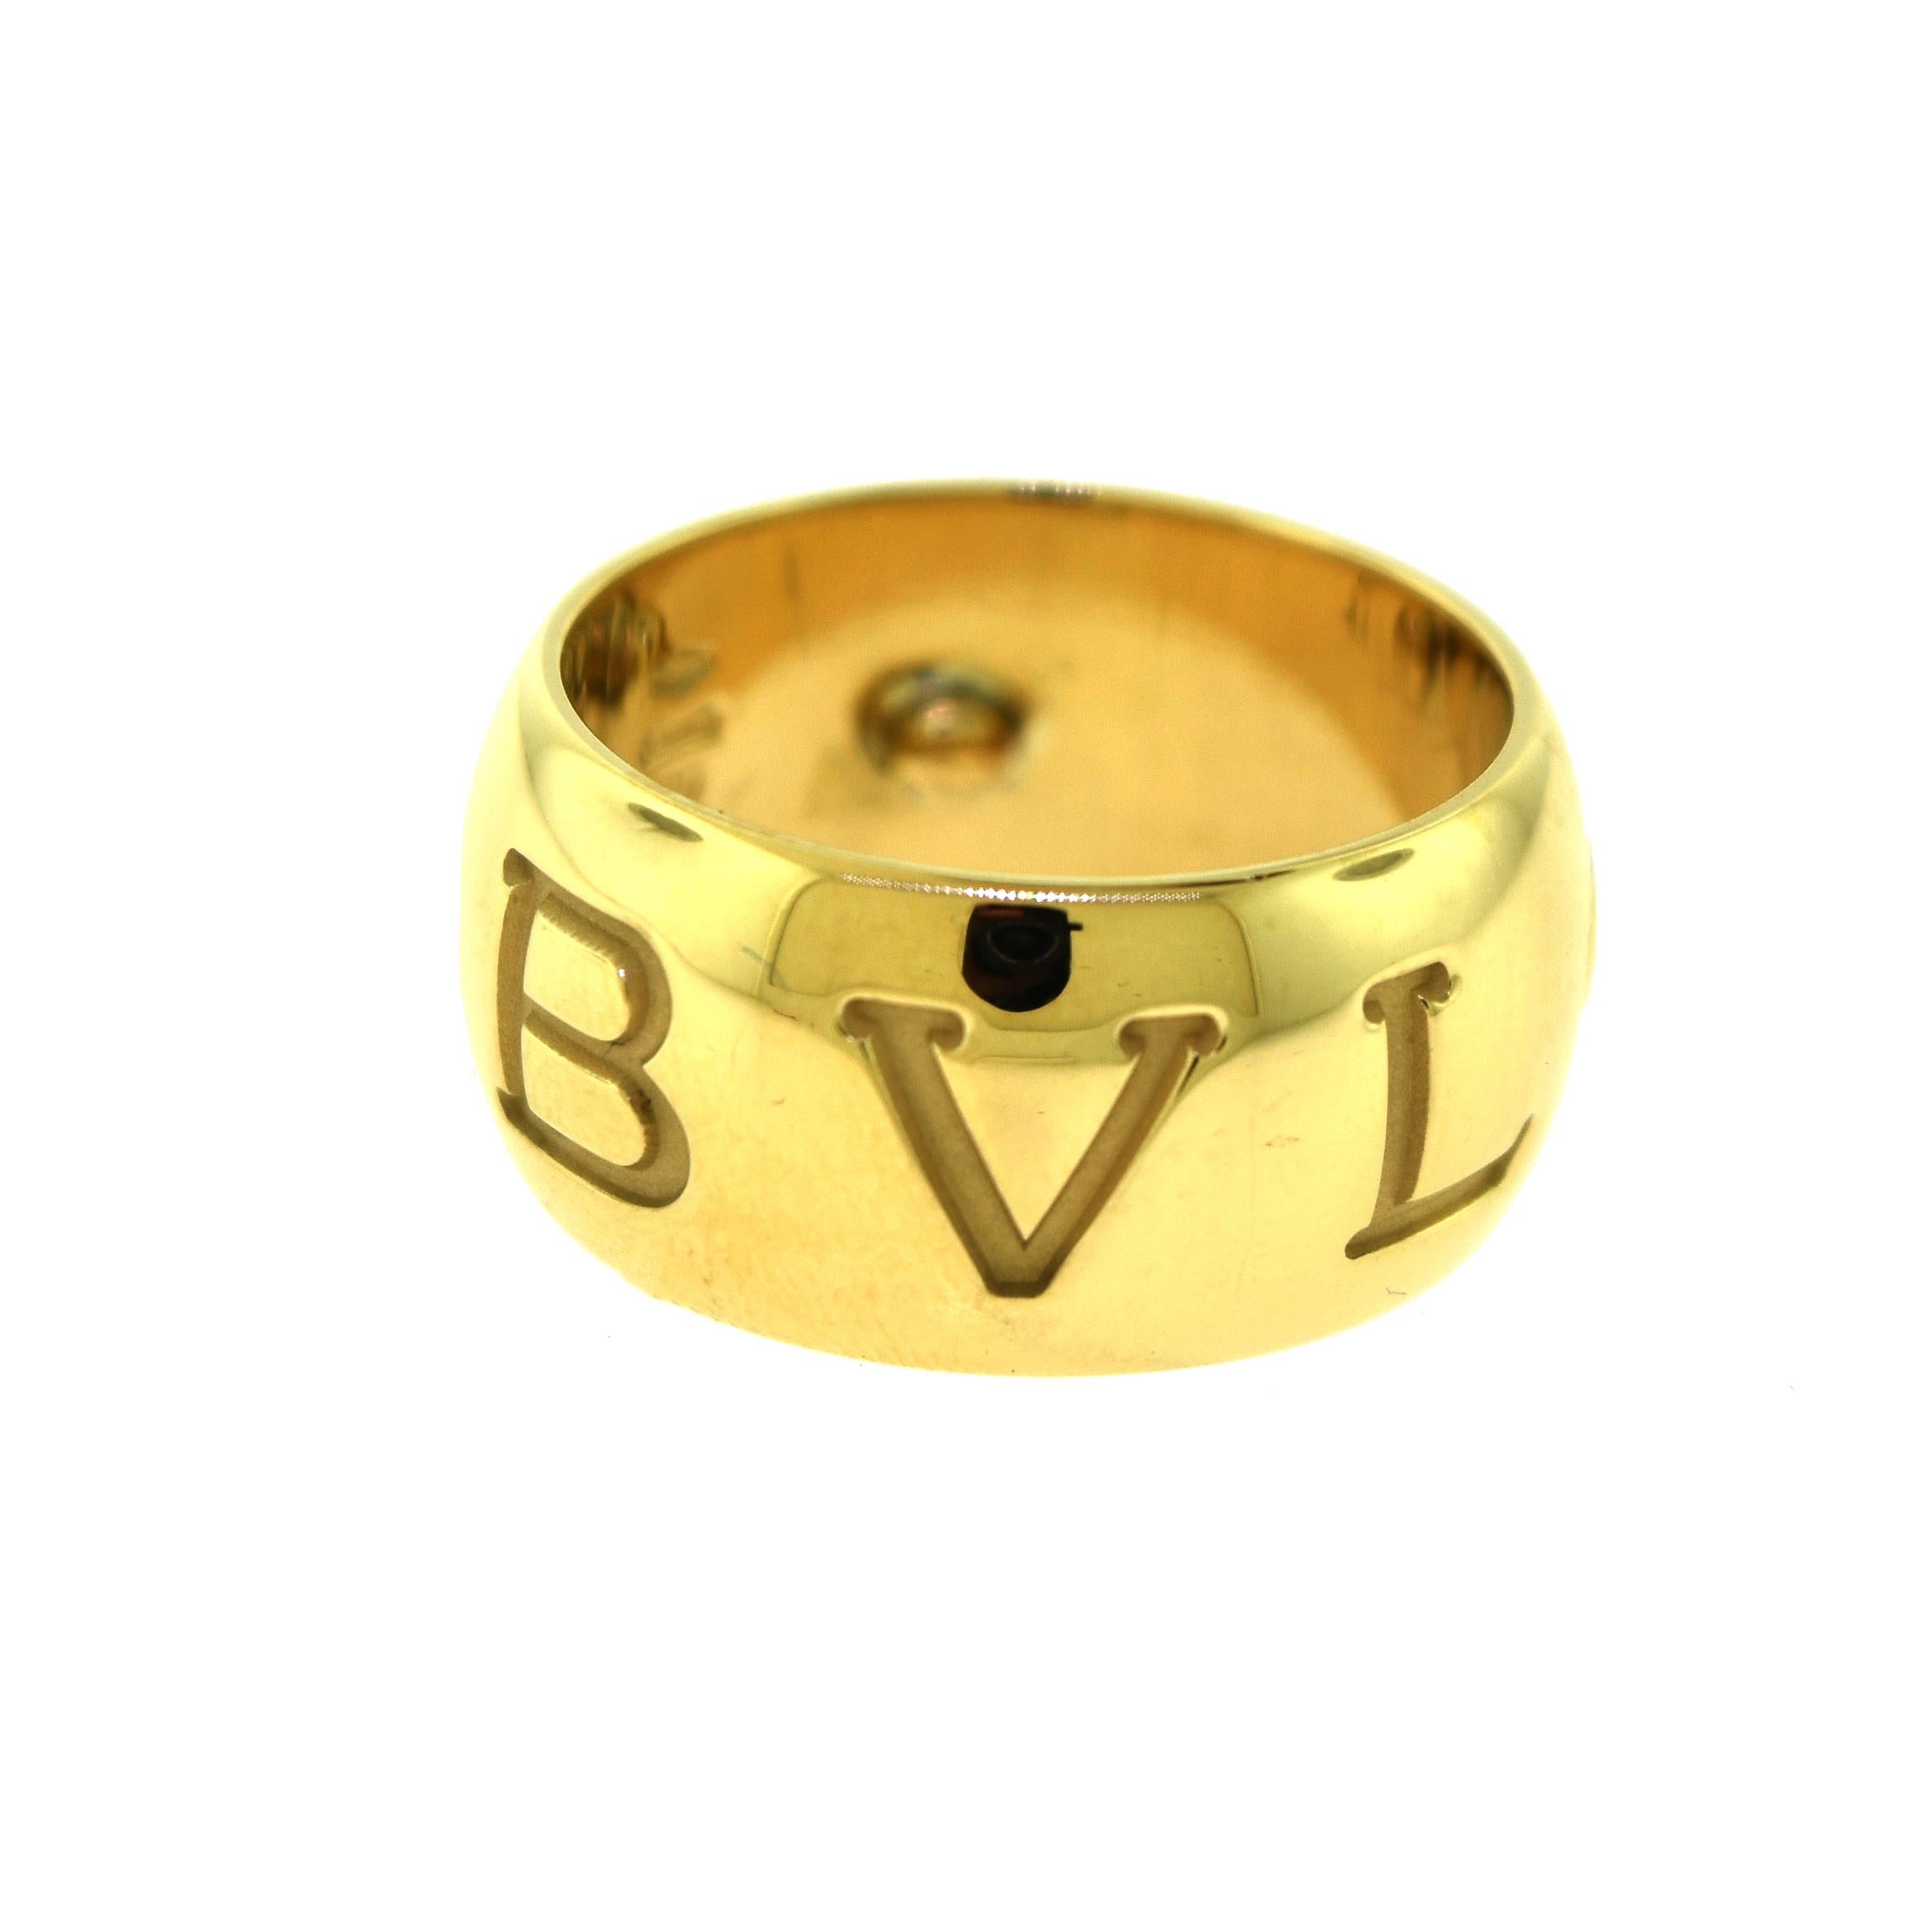 Brilliance Jewels, Miami
Questions? Call Us Anytime!
786,482,8100

Ring Size: 54 (euro) 

Designer: Bvlgari

Collection: Monologo

Style: Wide Ring

Metal: Yellow Gold

Metal Purity: 18k

Total Item Weight (grams):  13.4

Ring Width: 9.86